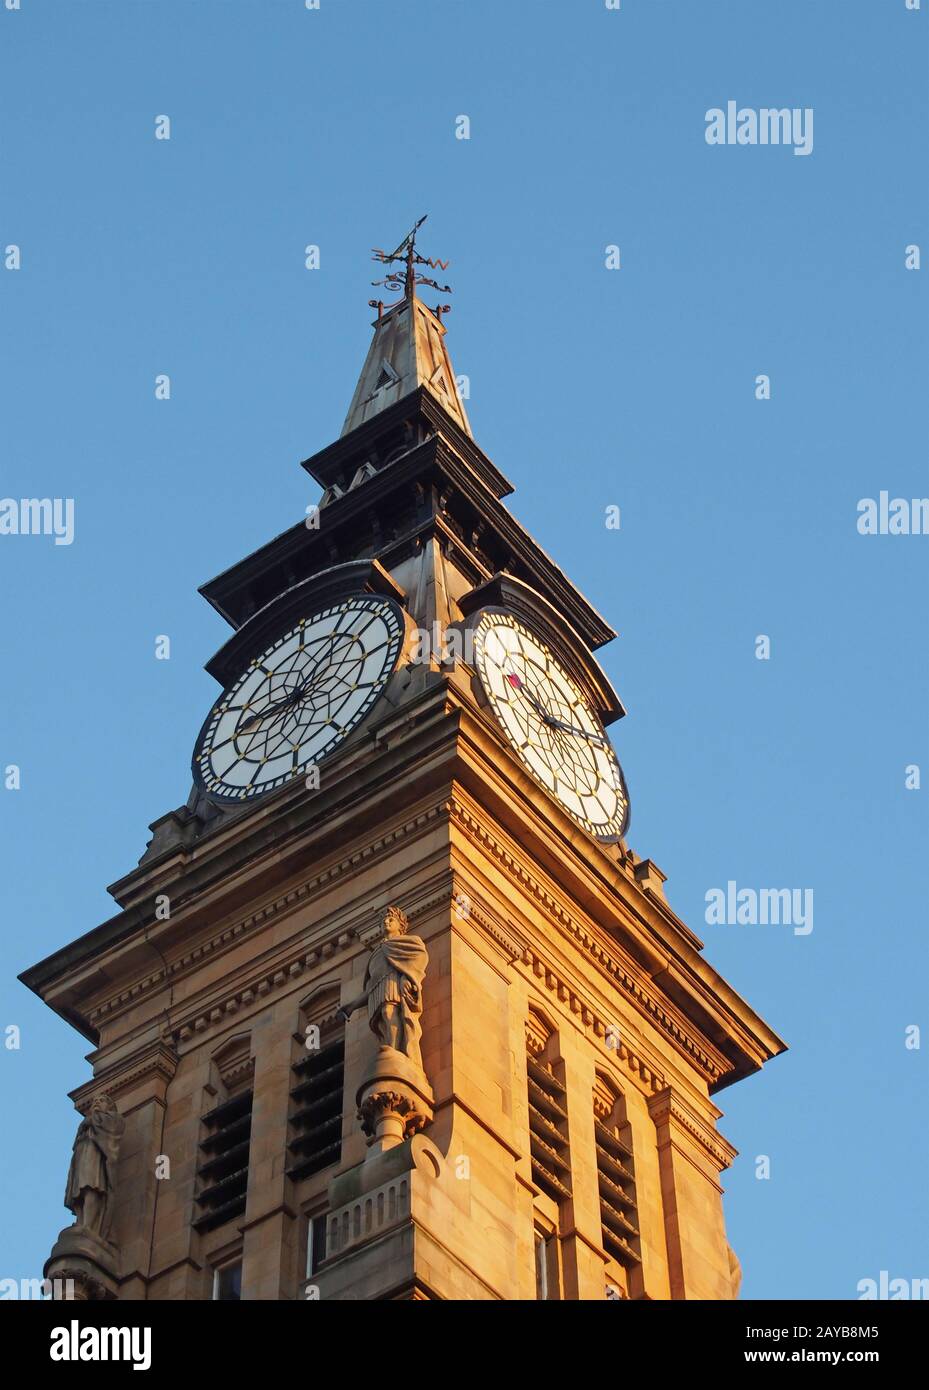 the clock tower of the historic victorian atkinson building in southport merseyside against a blue summer sky Stock Photo